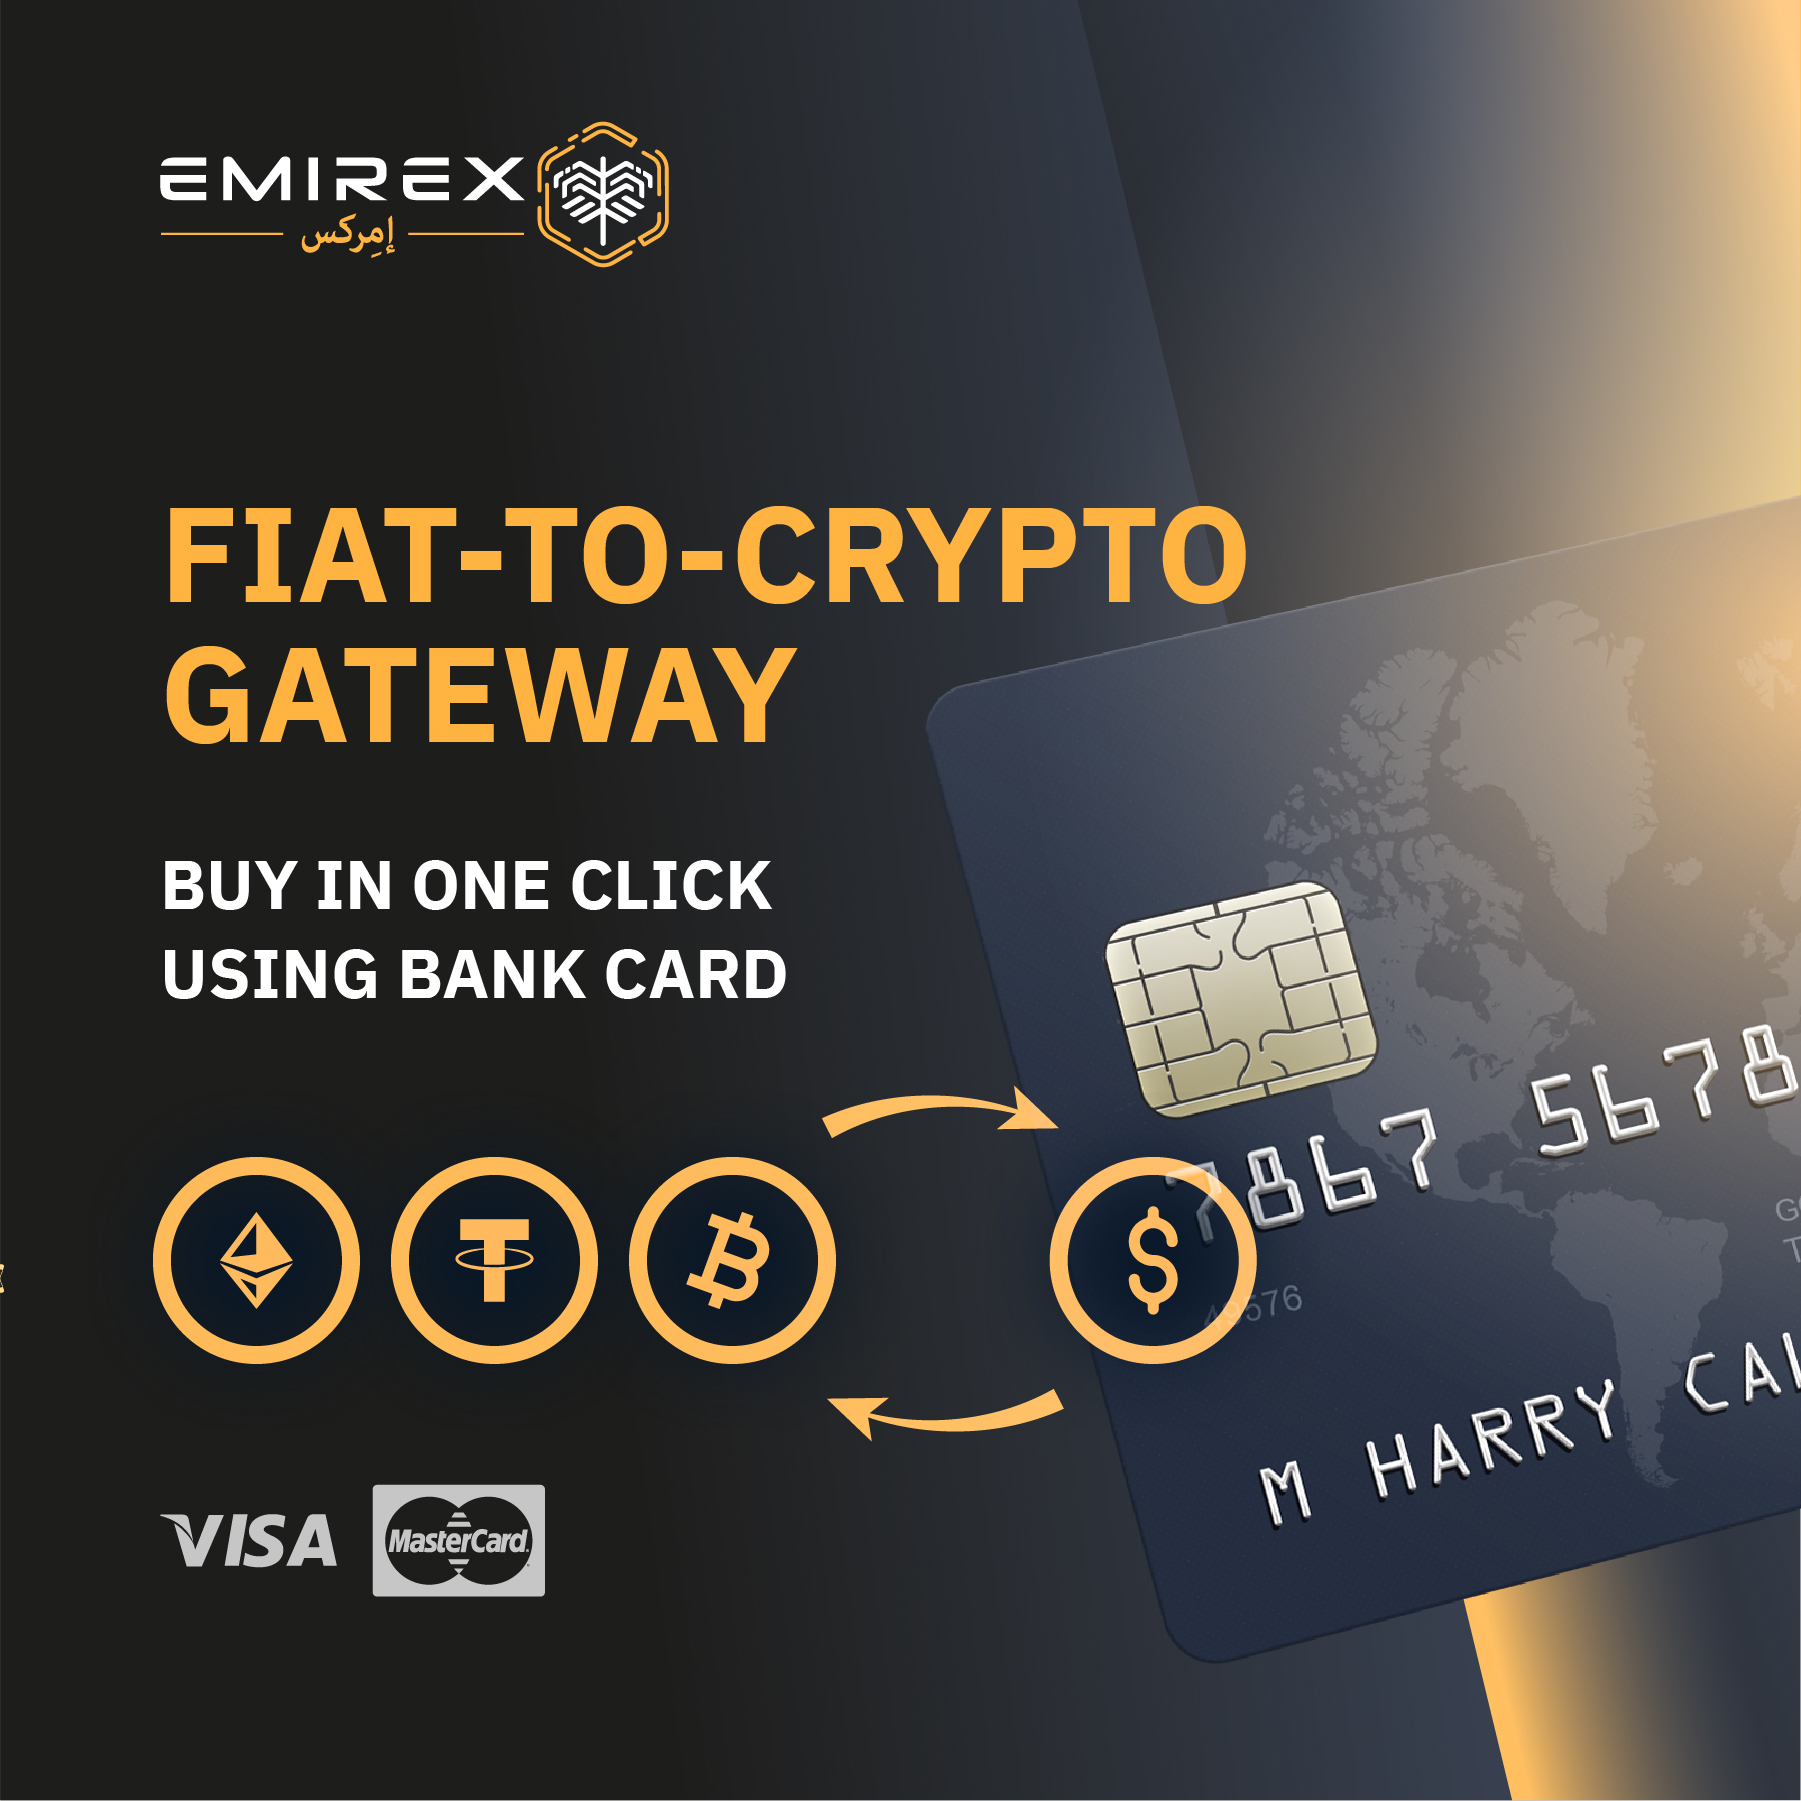 Emirex Added Bank Cards Support for Crypto Purchases